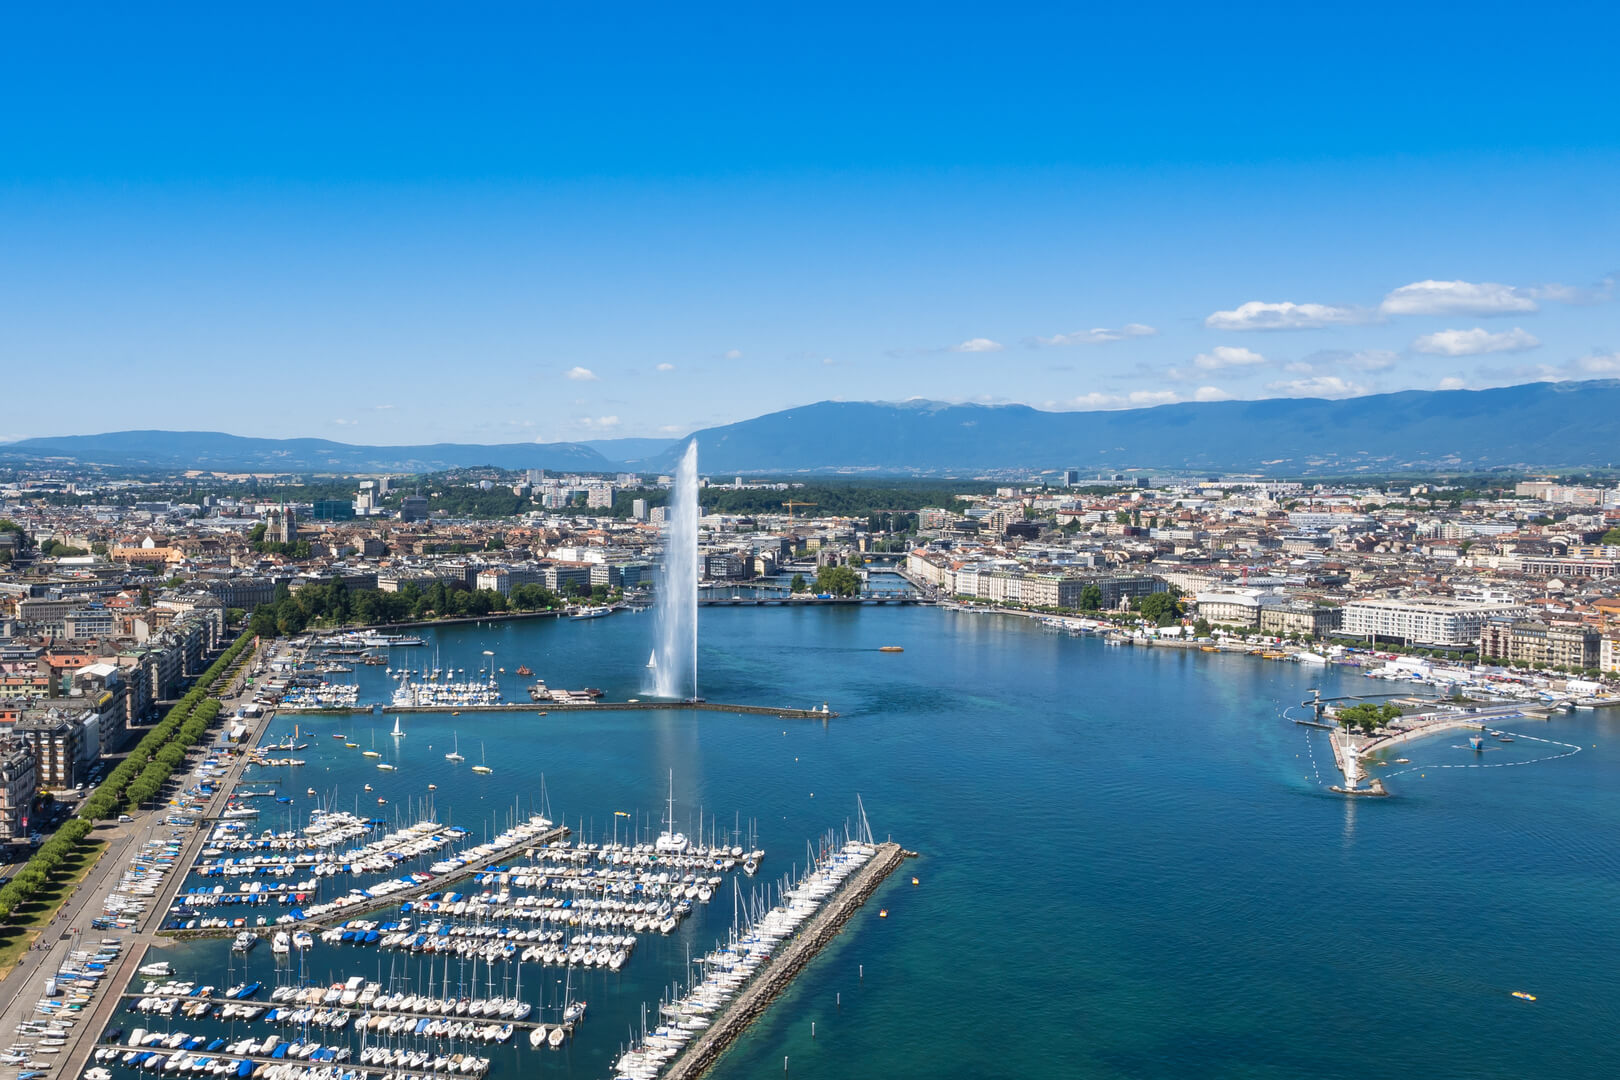 Aerial view of the lake Leman with the city of Geneva in the Background